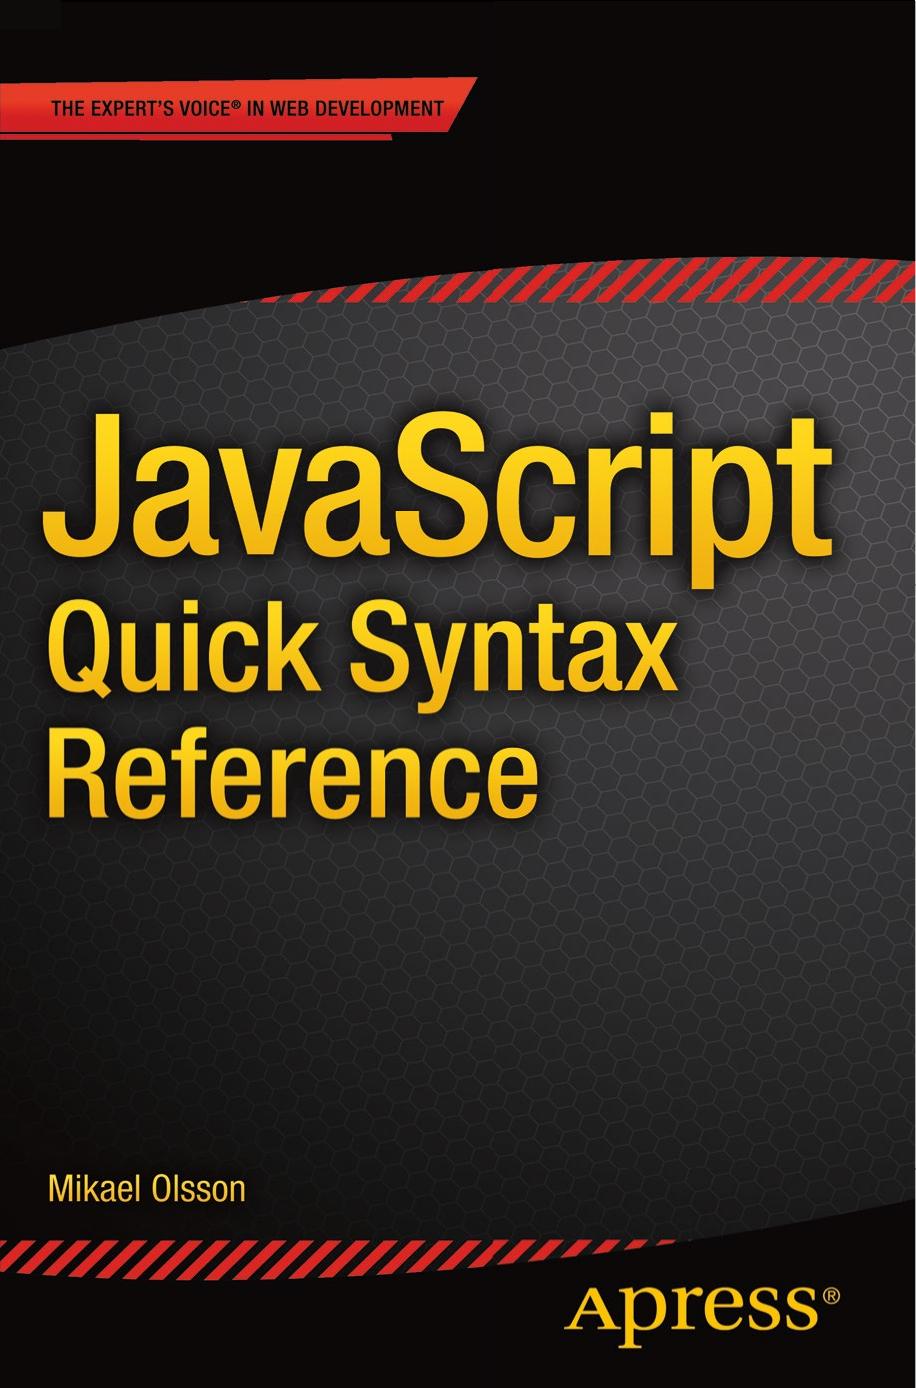 JavaScript Quick Syntax Reference by Mikael Olsson